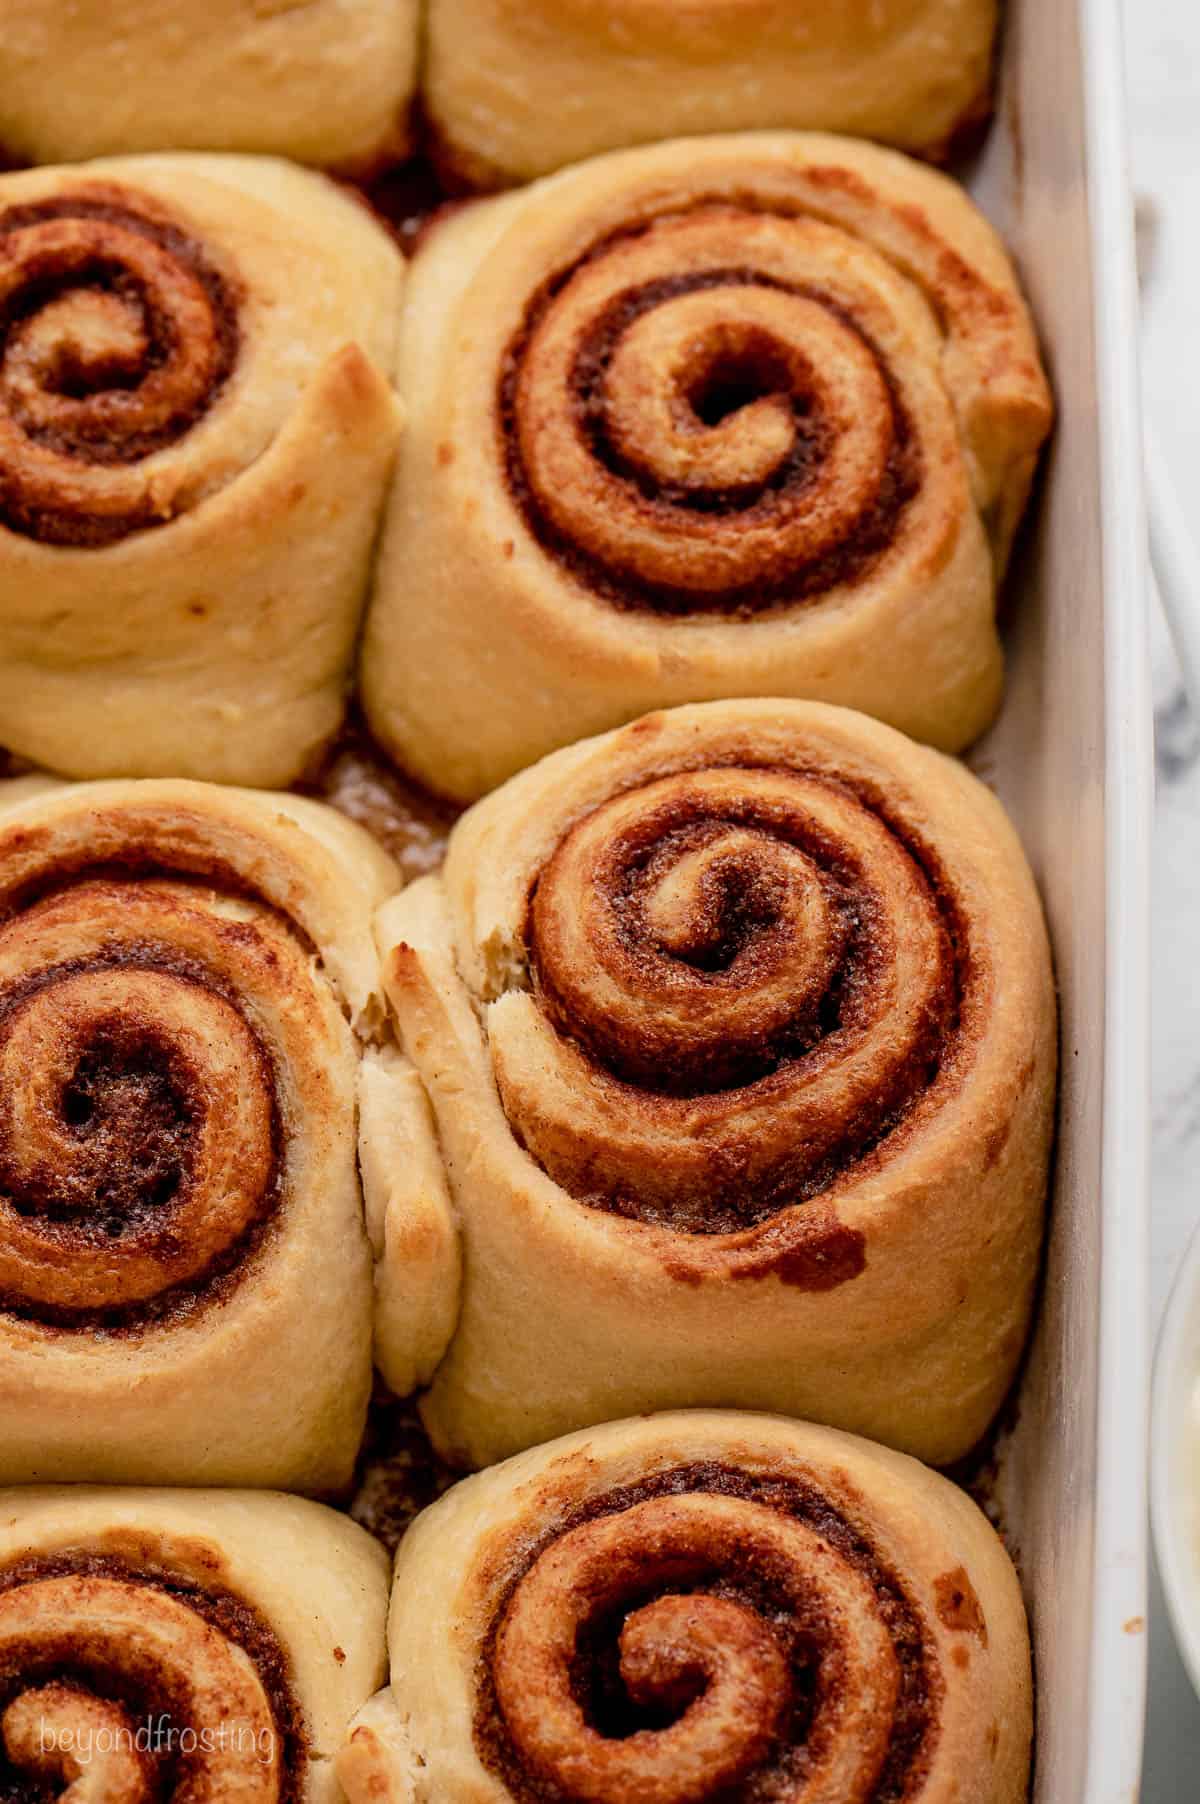 Close up of baked cinnamon rolls in a ceramic dish.